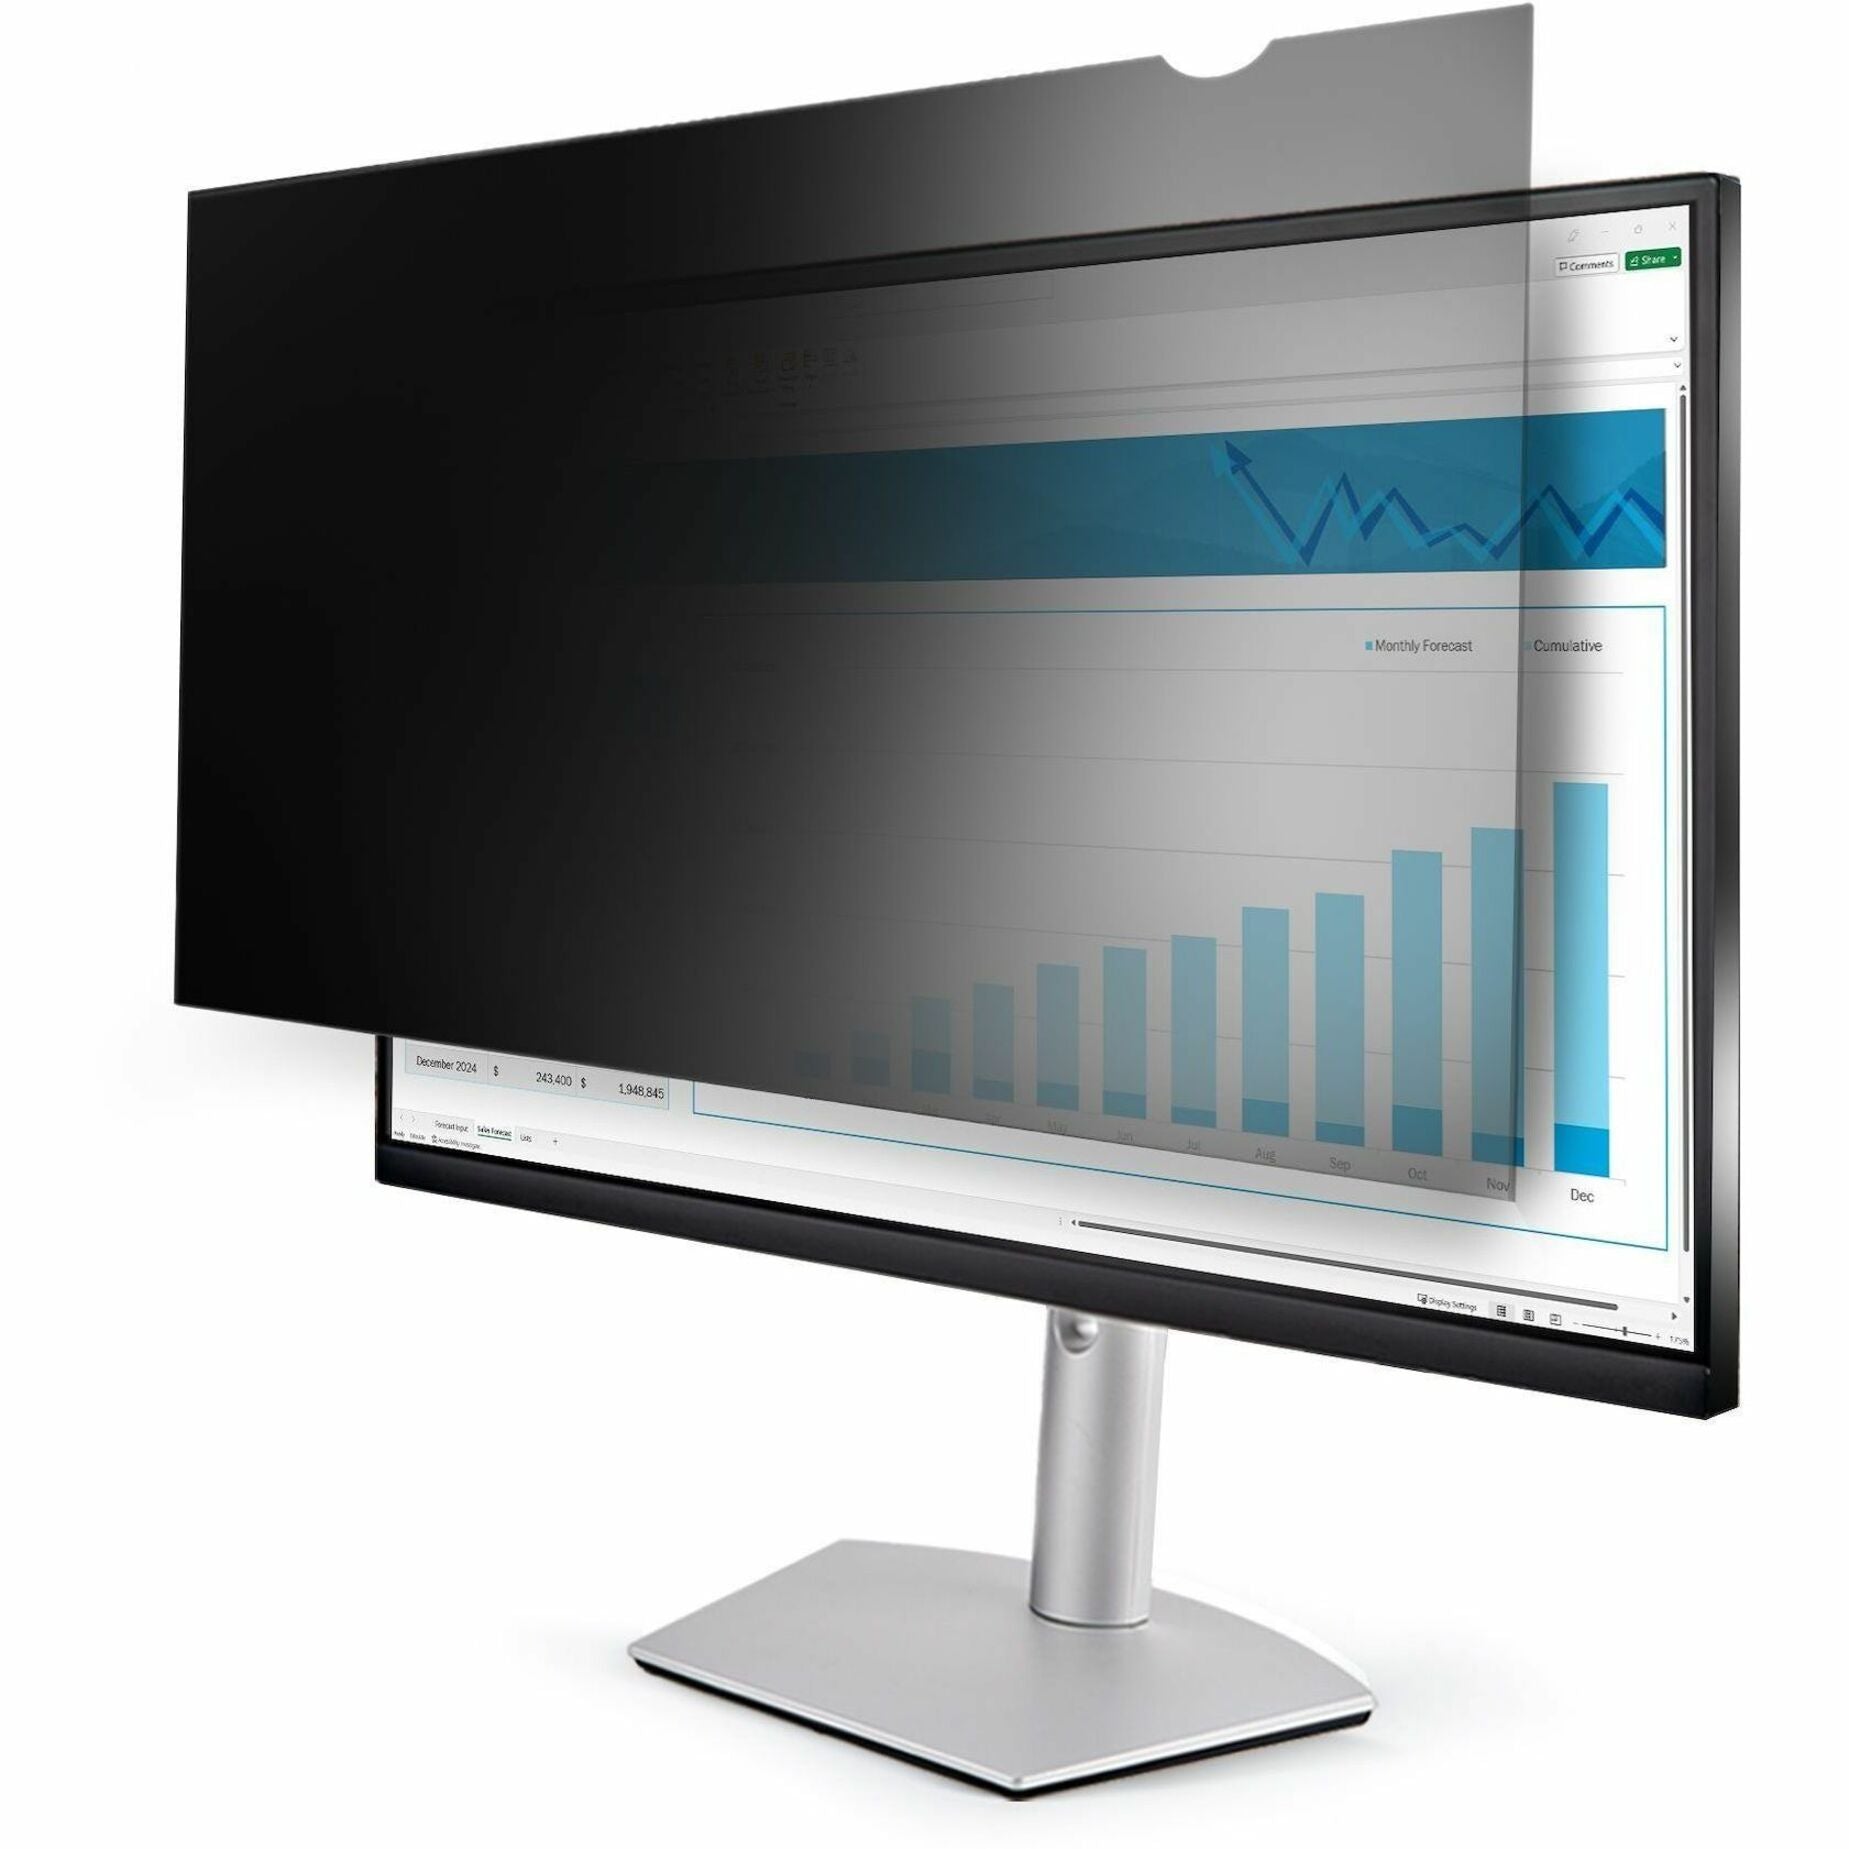 StarTech.com 19569-PRIVACY-SCREEN Privacy Screen Filter, Blue Light Reduction, Reversible, Residue-free, Anti-glare, 16:9, 19.5" LCD Monitor